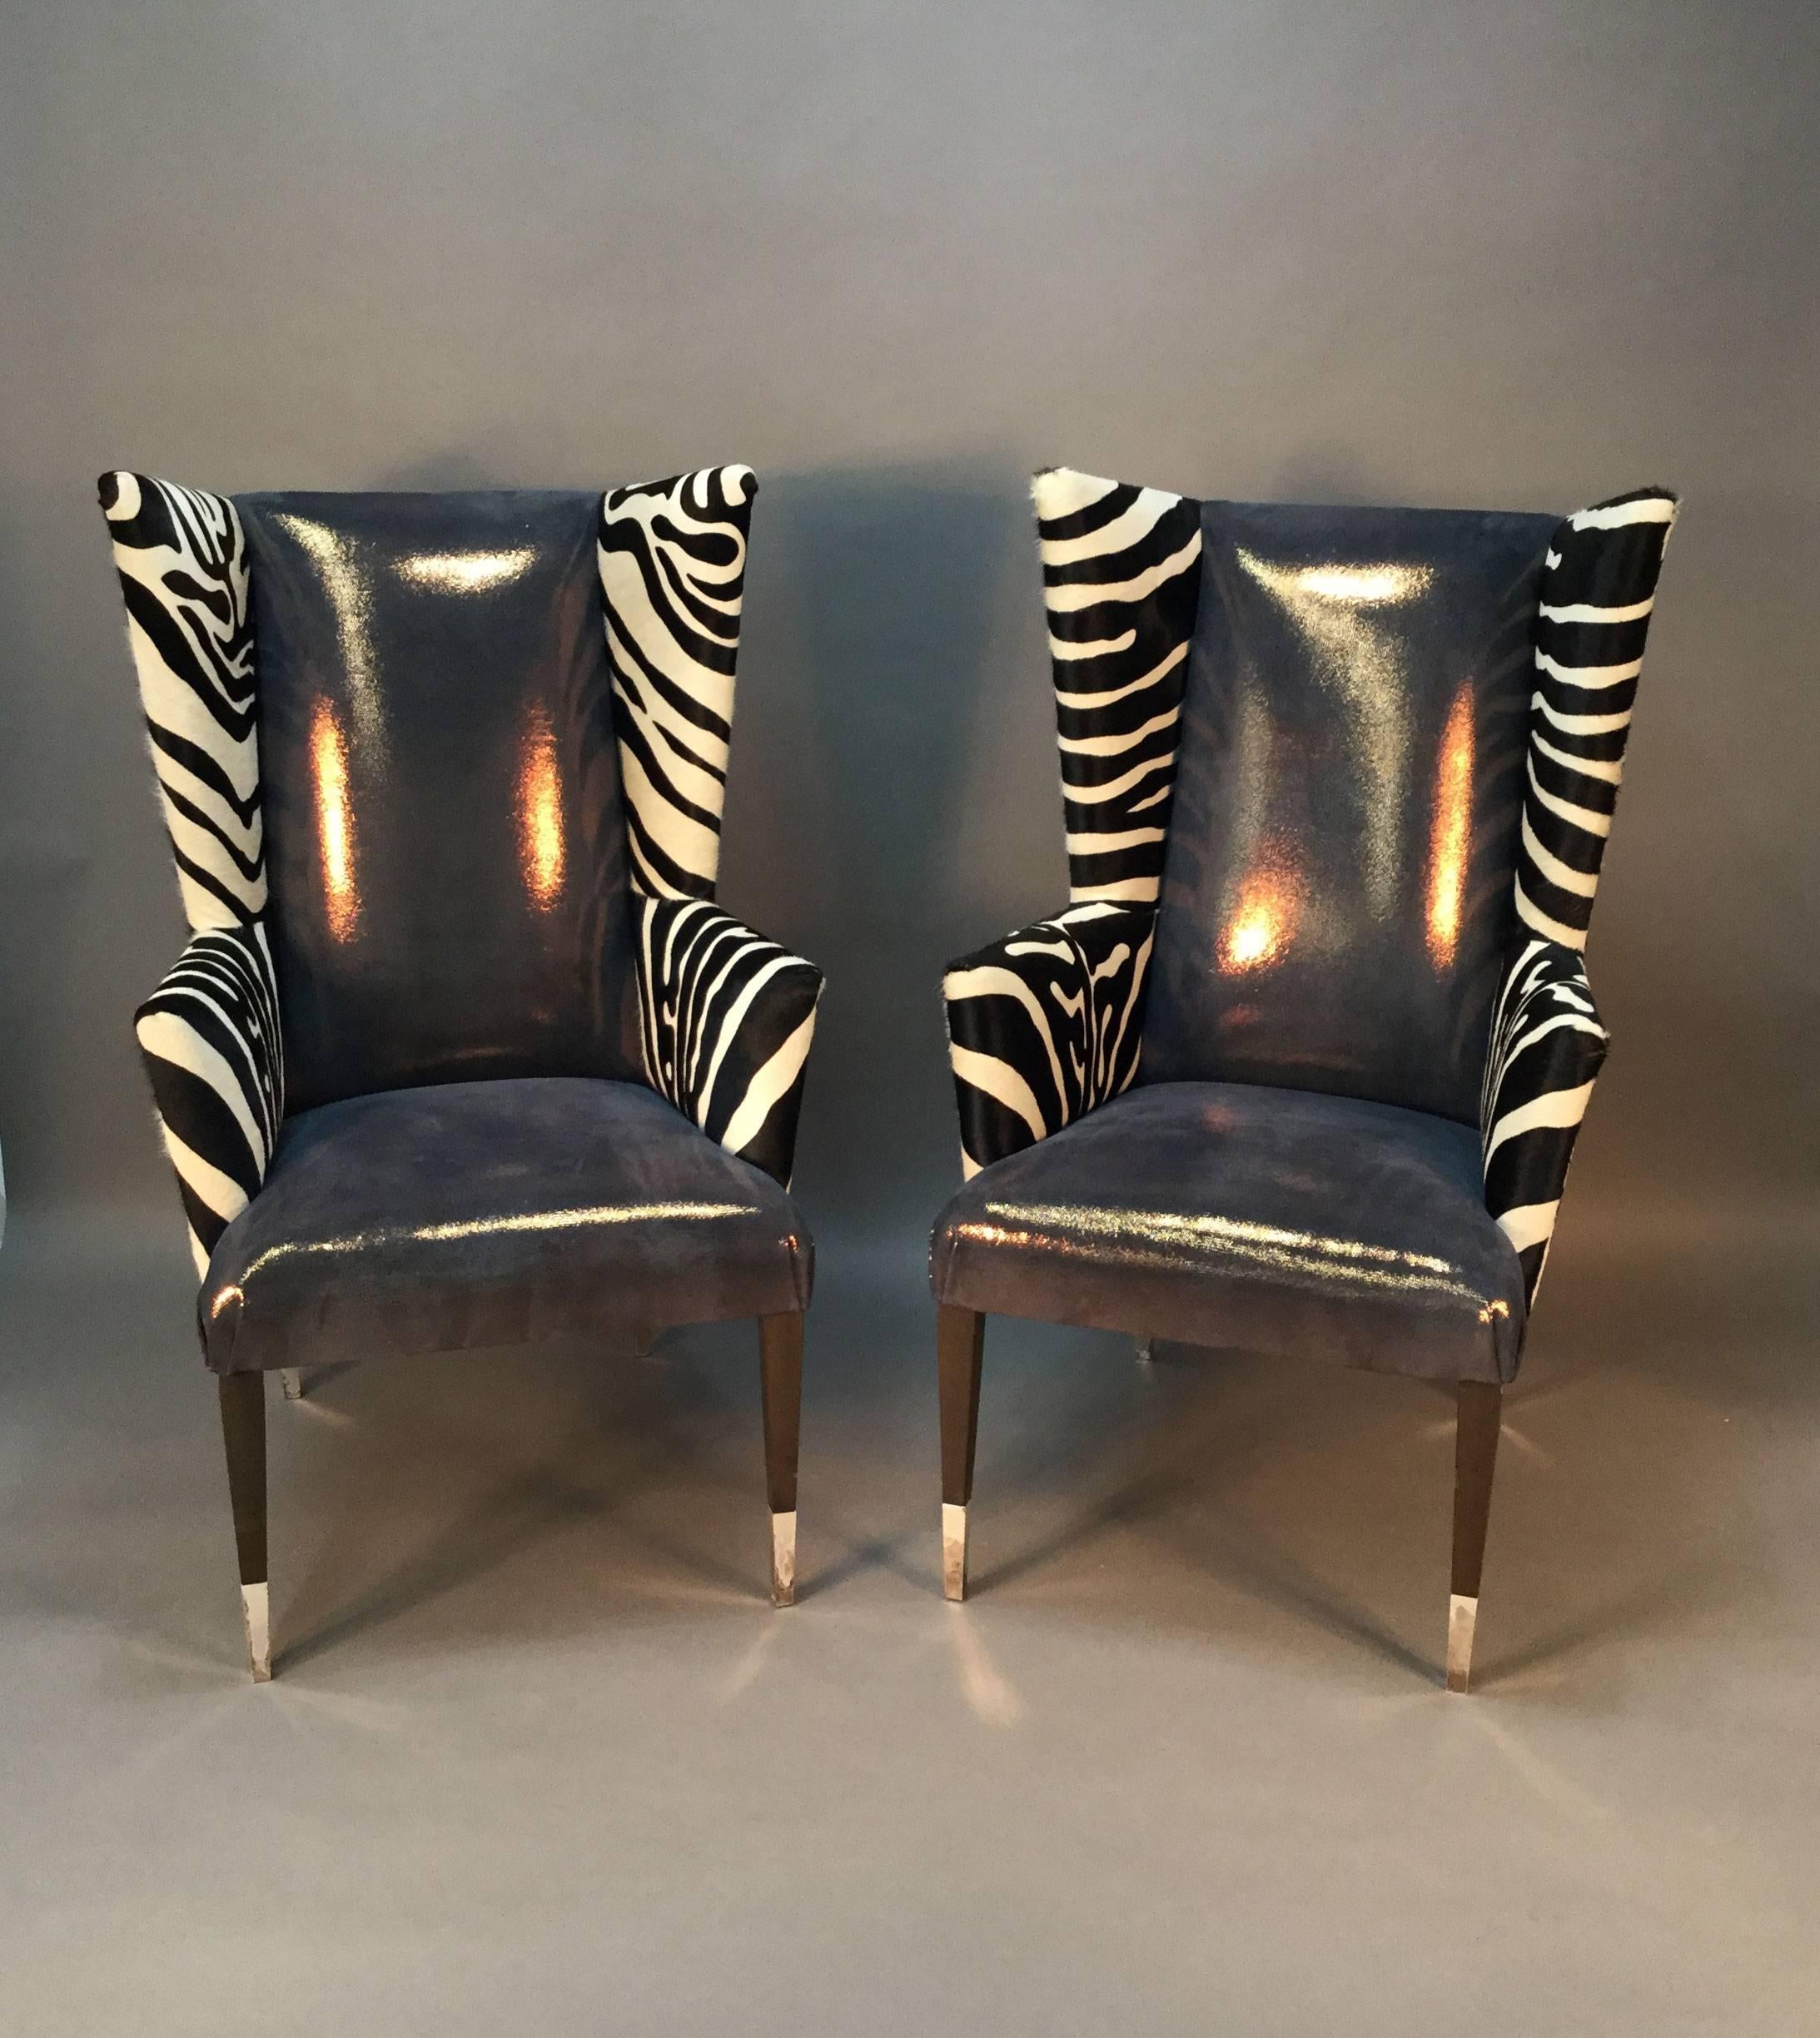 This is an amazing pair of wingback chairs by Sally Sirkin Lewis for J. Robert Scott. Back and arms upholstered in zebra print cowhide. Front upholstered in faux shagreen. Stained legs with silver plated sabots. Incredible statement pieces.